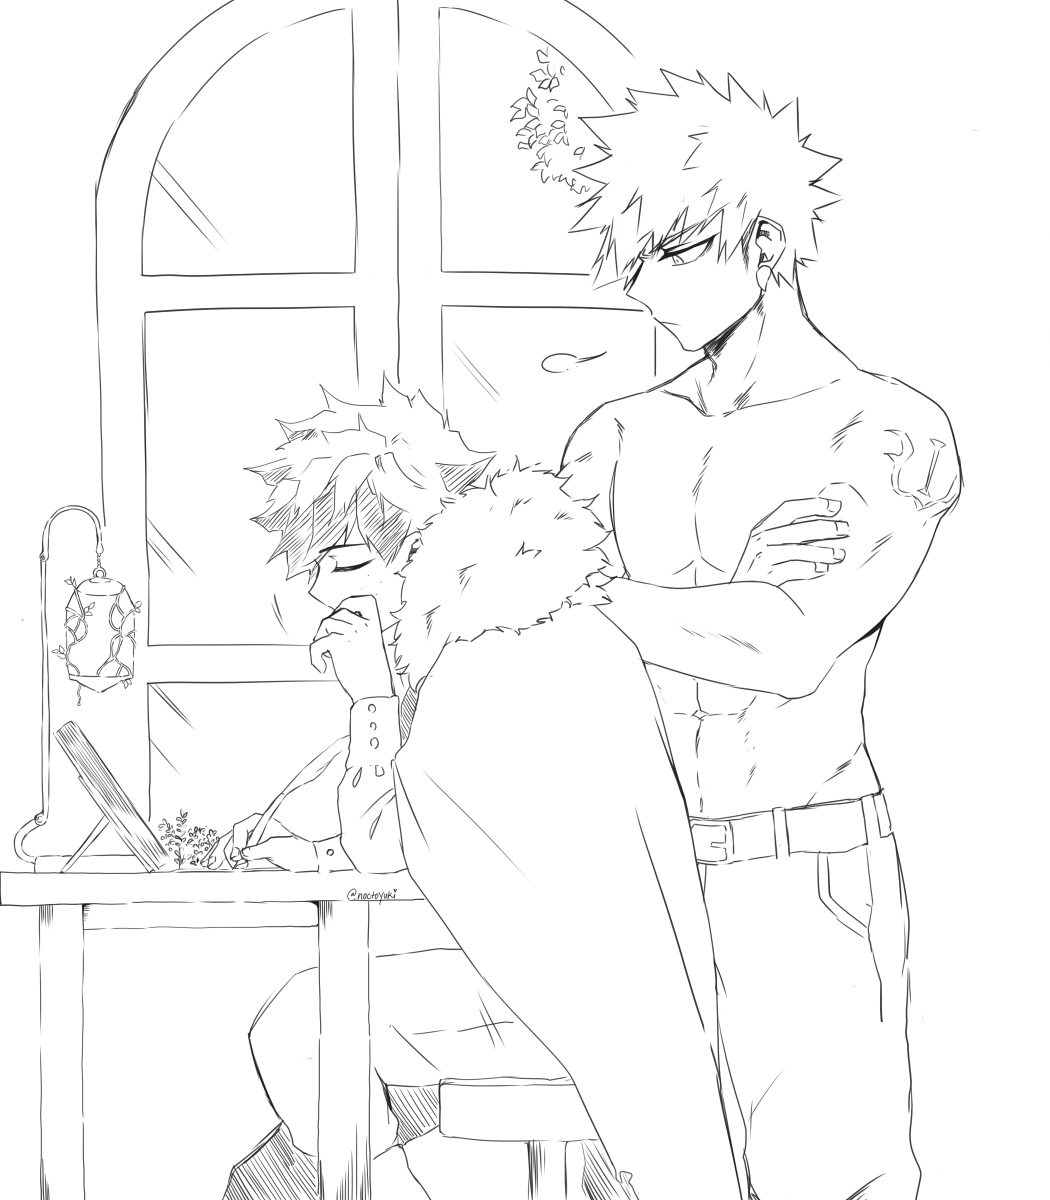 tilly reminded me of fantasy bkdk and I tried sketching them from memory. I might got some details wrong/forgot a lot of things but yeah....fantasy au 